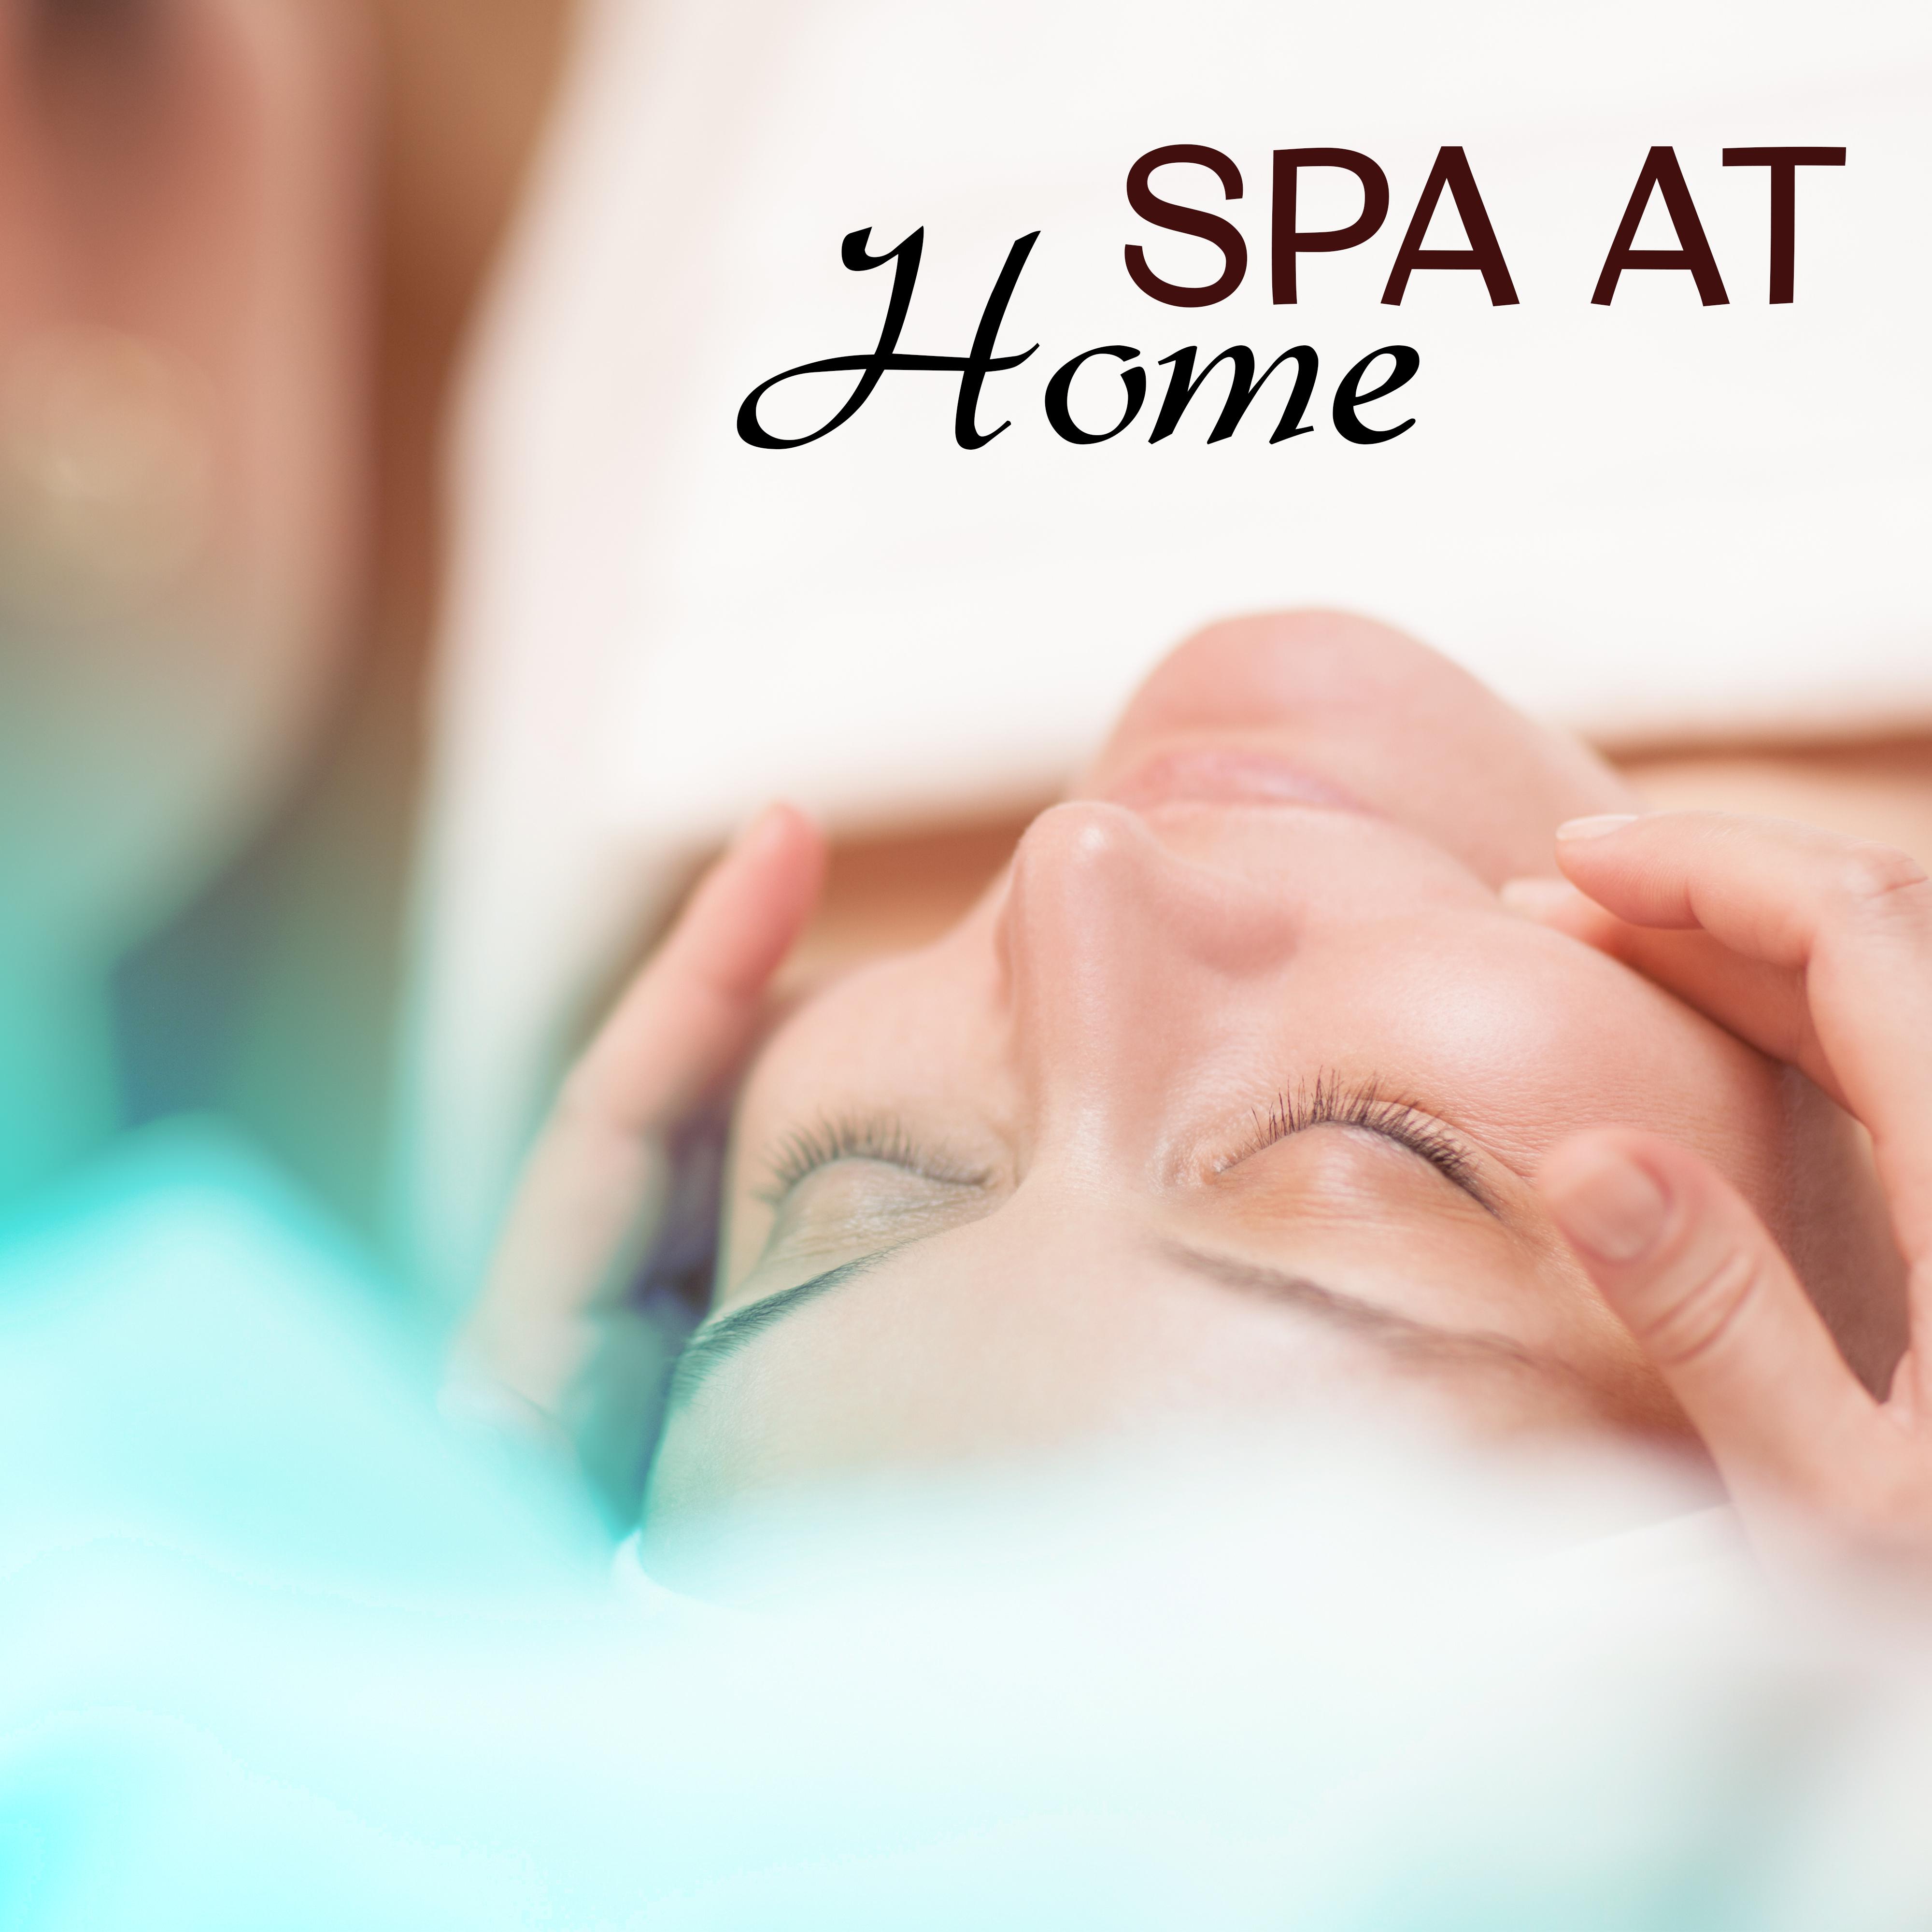 Spa at Home – New Age Music for Spa Relaxation, Lazy Saturday, Positive Vibes